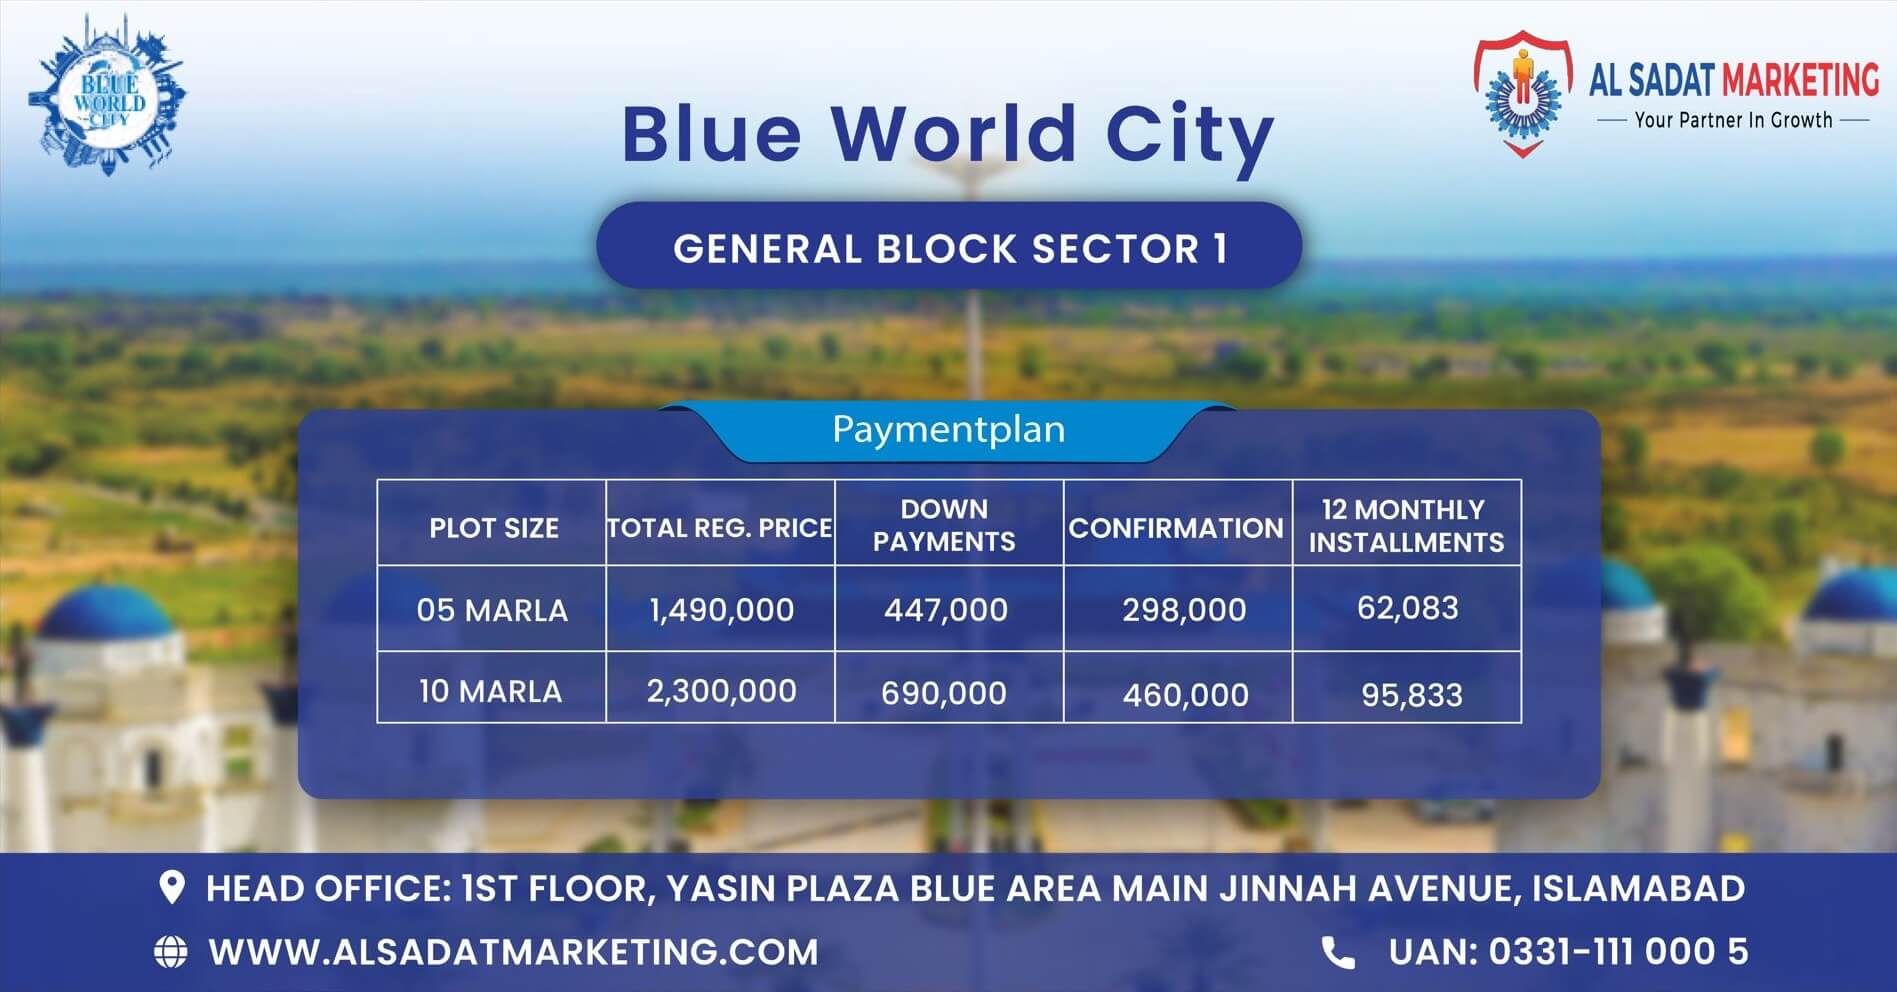 blue world city residential plots payment plan – blue world city islamabad residential plots payment plan – blue world city rawalpindi residential plots payment plan – blue world city general block sector 1 payment plan – blue world city islamabad general block sector 1 payment plan – blue world city rawalpindi general block sector 1 payment plan – blue world city payment plan – blue world city islamabad payment plan - blue world city rawalpindi payment plan – blue world city– blue world city islamabad – blue world city rawalpindi– blue world city housing society – blue world city islamabad housing society – blue world city real estate project – blue world city islamabad real estate project - al sadat marketing - alsadat marketing - al-sadat marketing